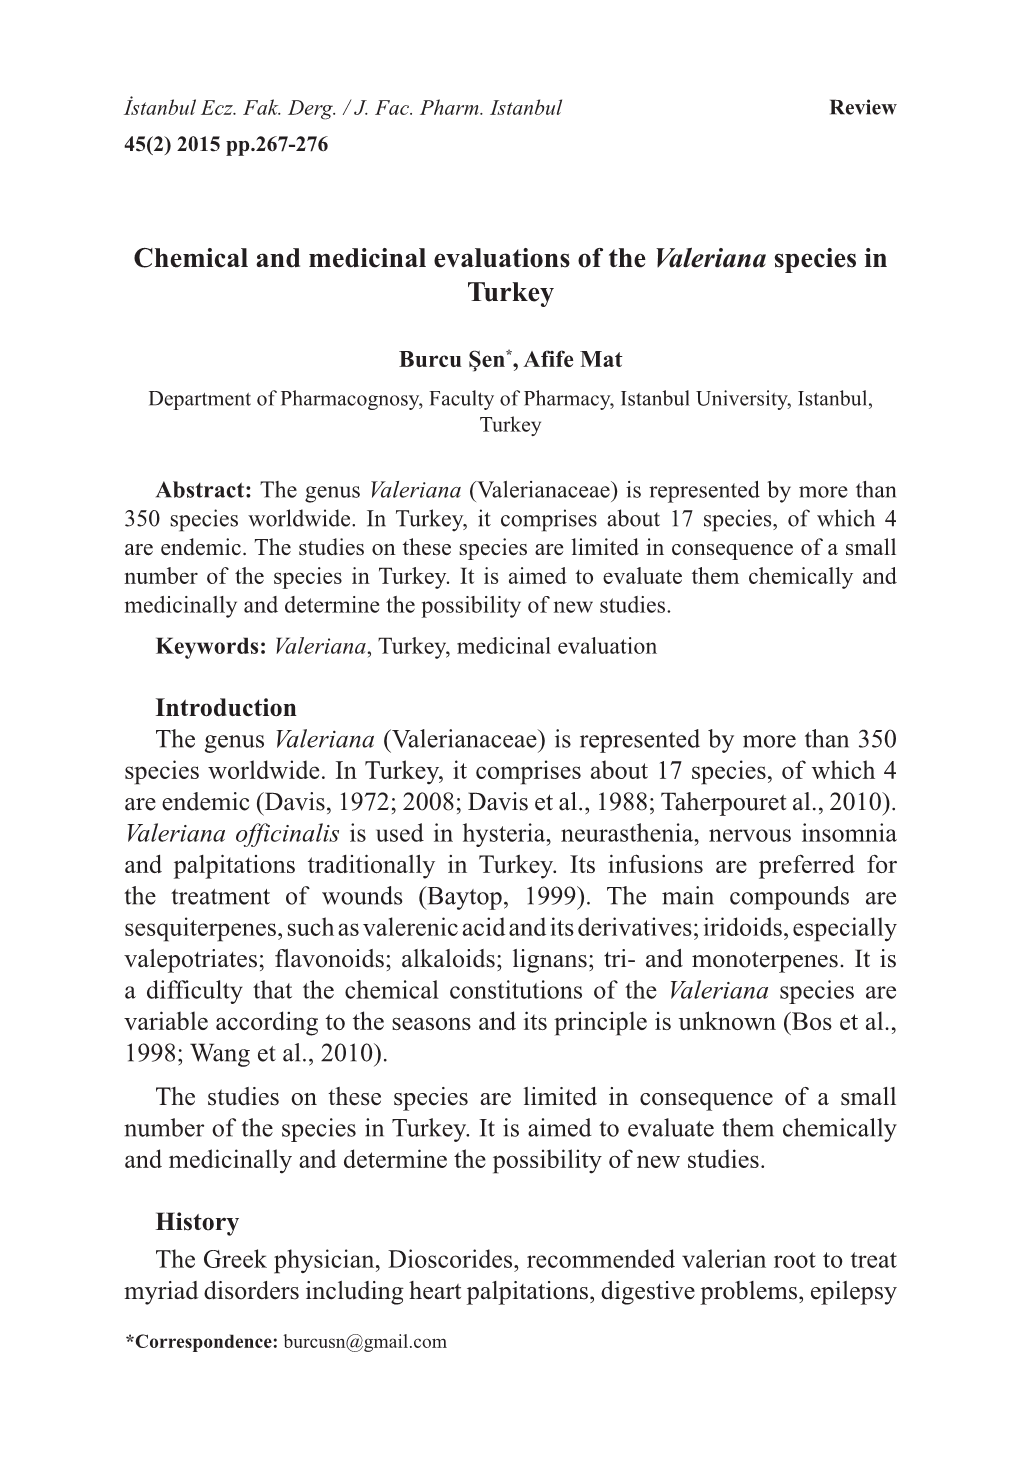 Chemical and Medicinal Evaluations of the Valeriana Species in Turkey